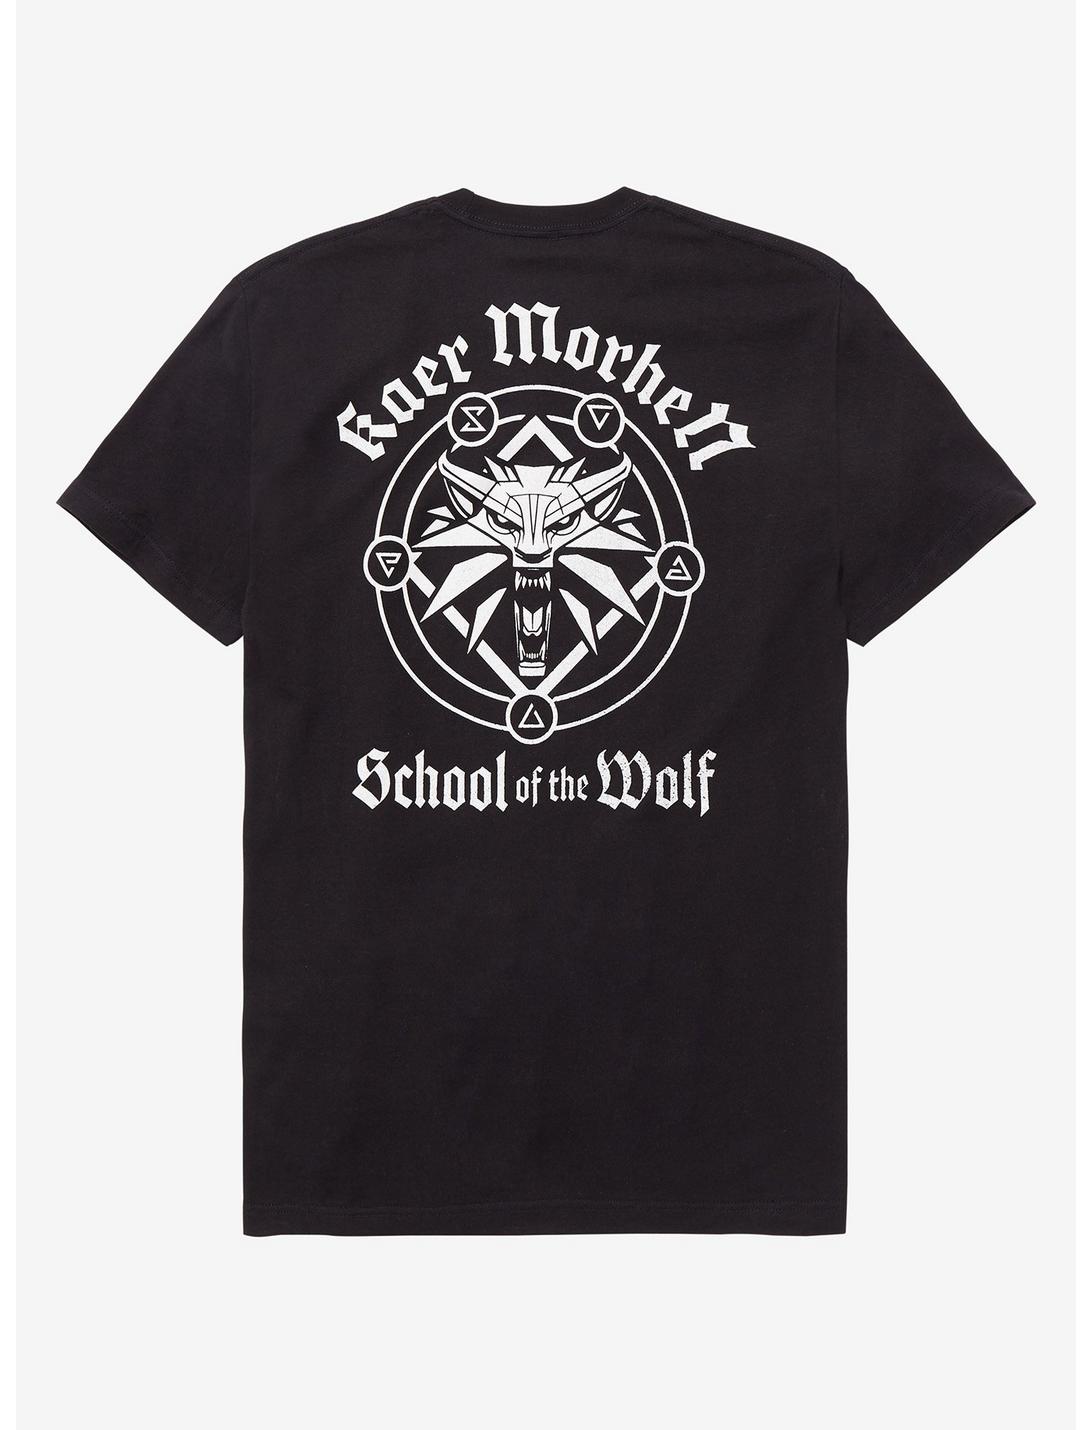 The Witcher Kaer Morhen School of the Wolf T-Shirt - BoxLunch Exclusive, BLACK, hi-res